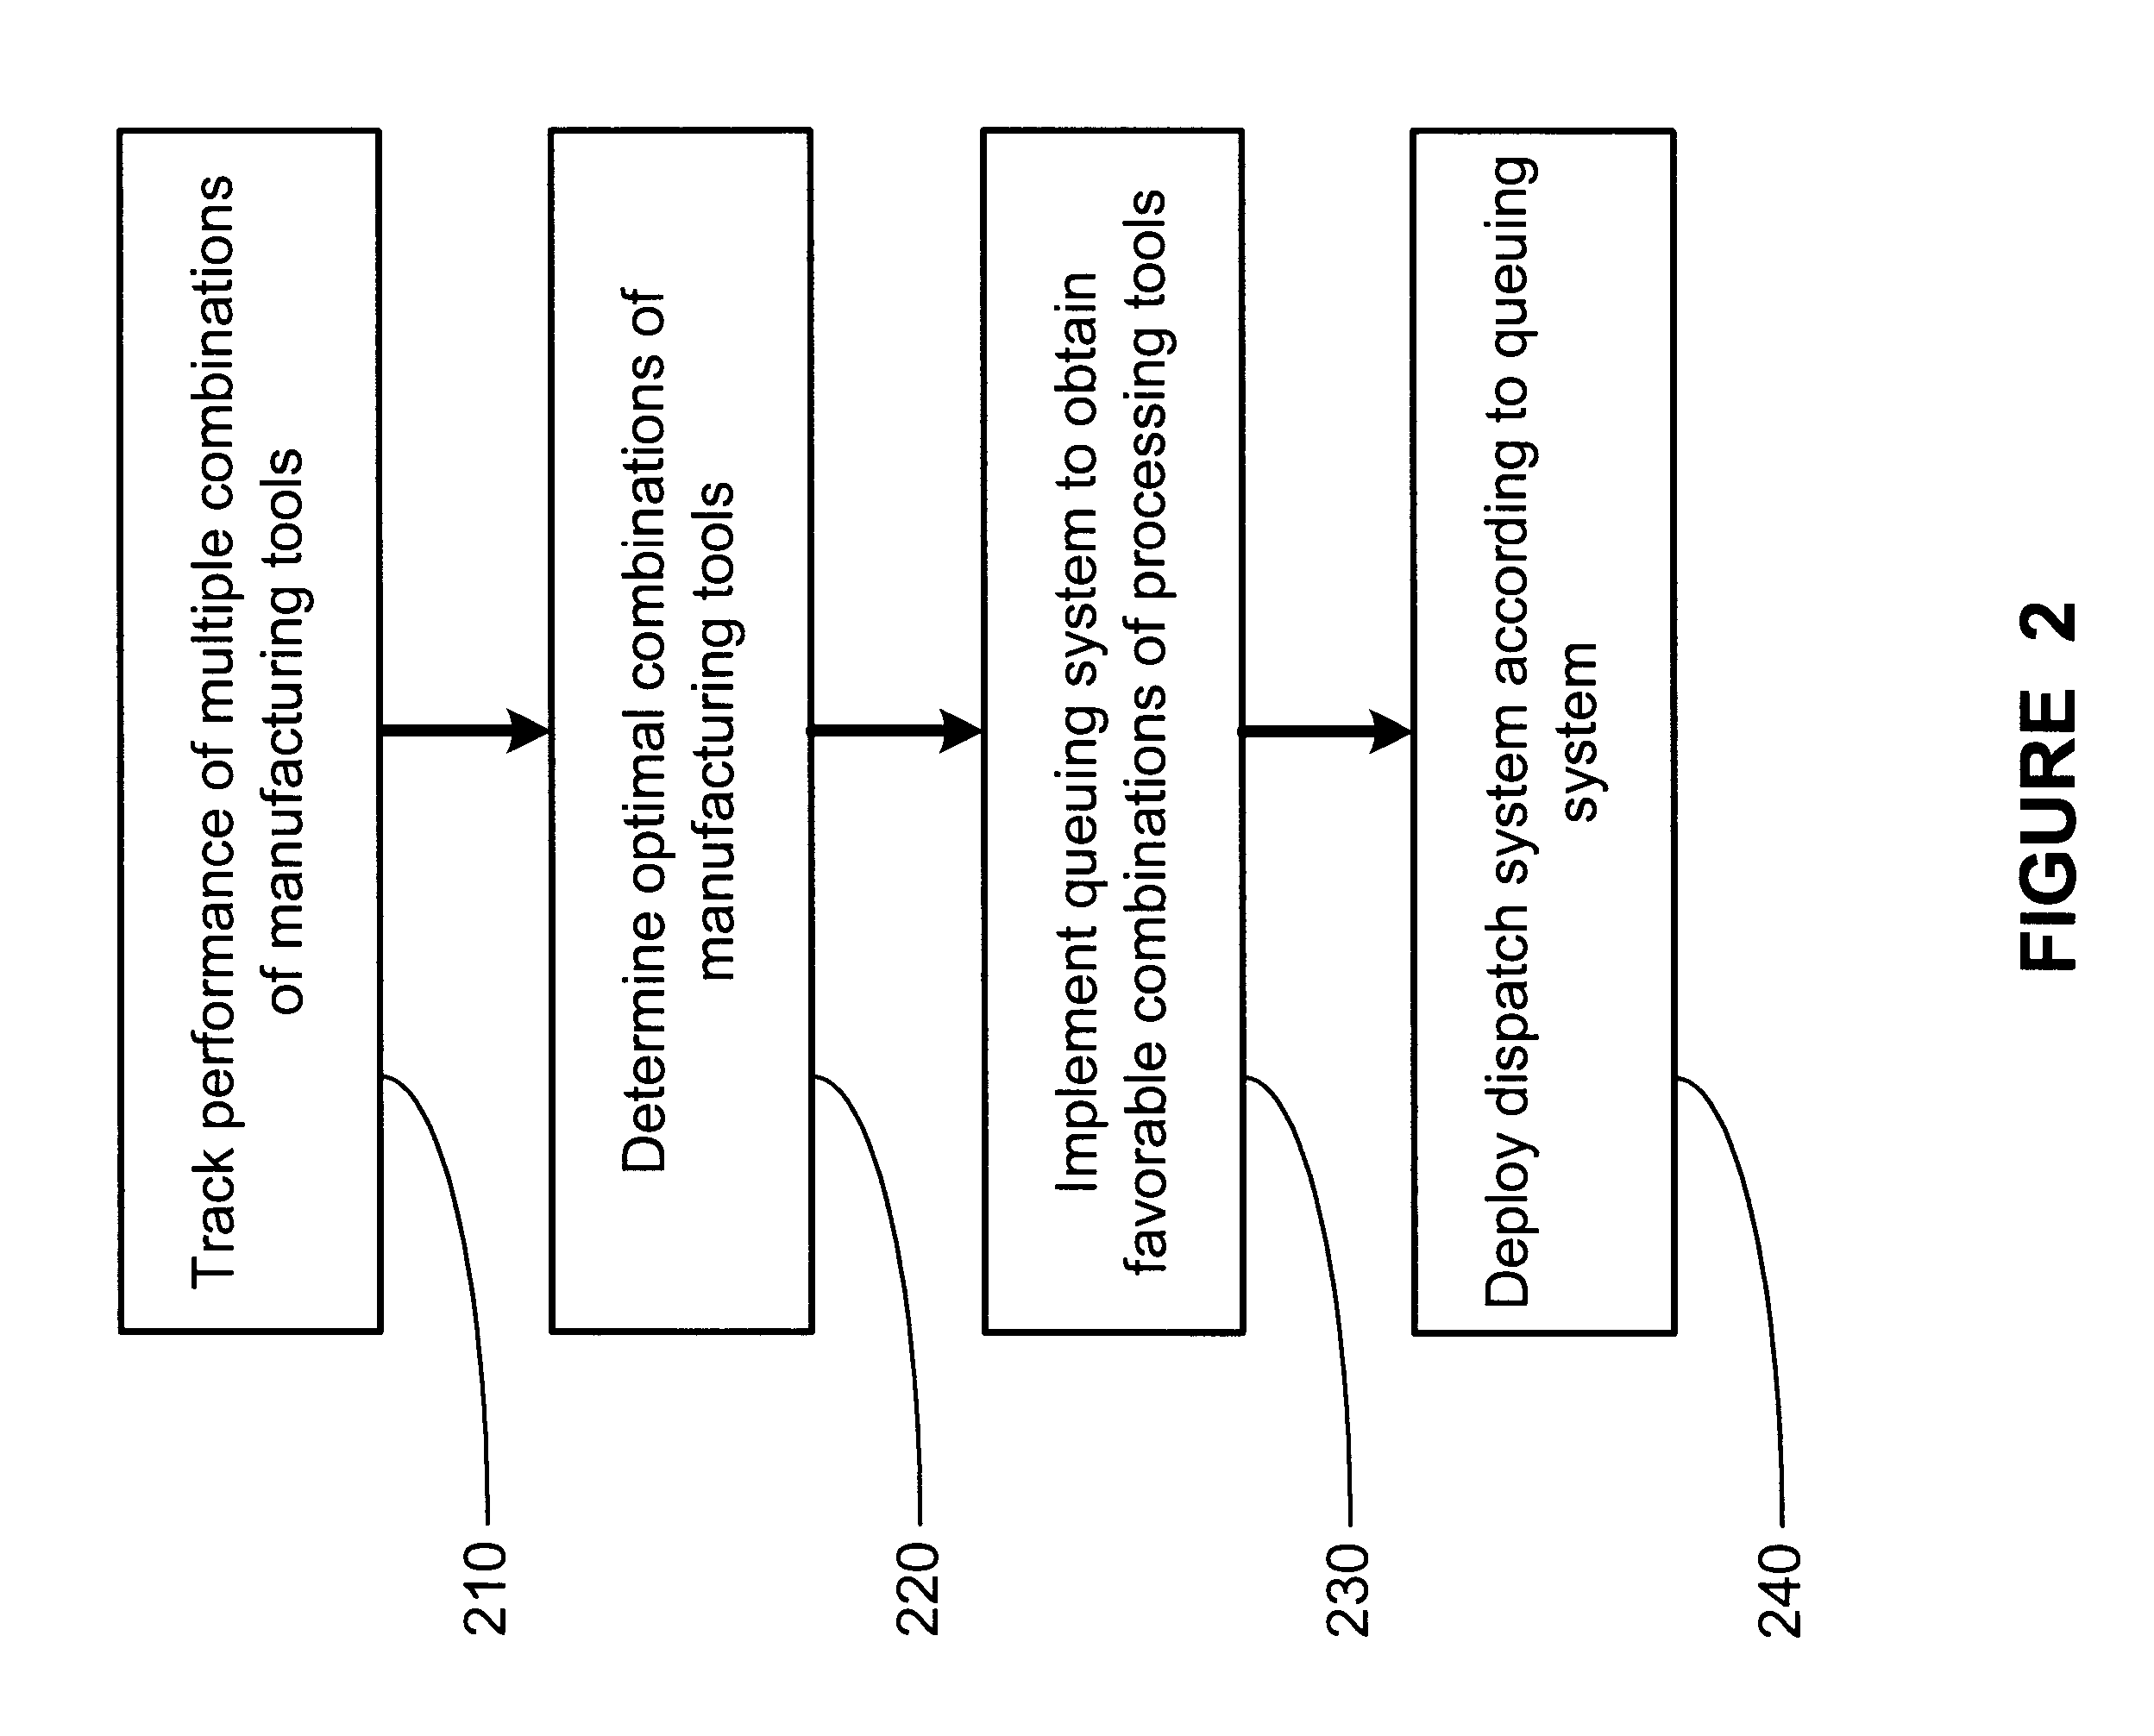 Method and apparatus for automatic routing for reentrant process